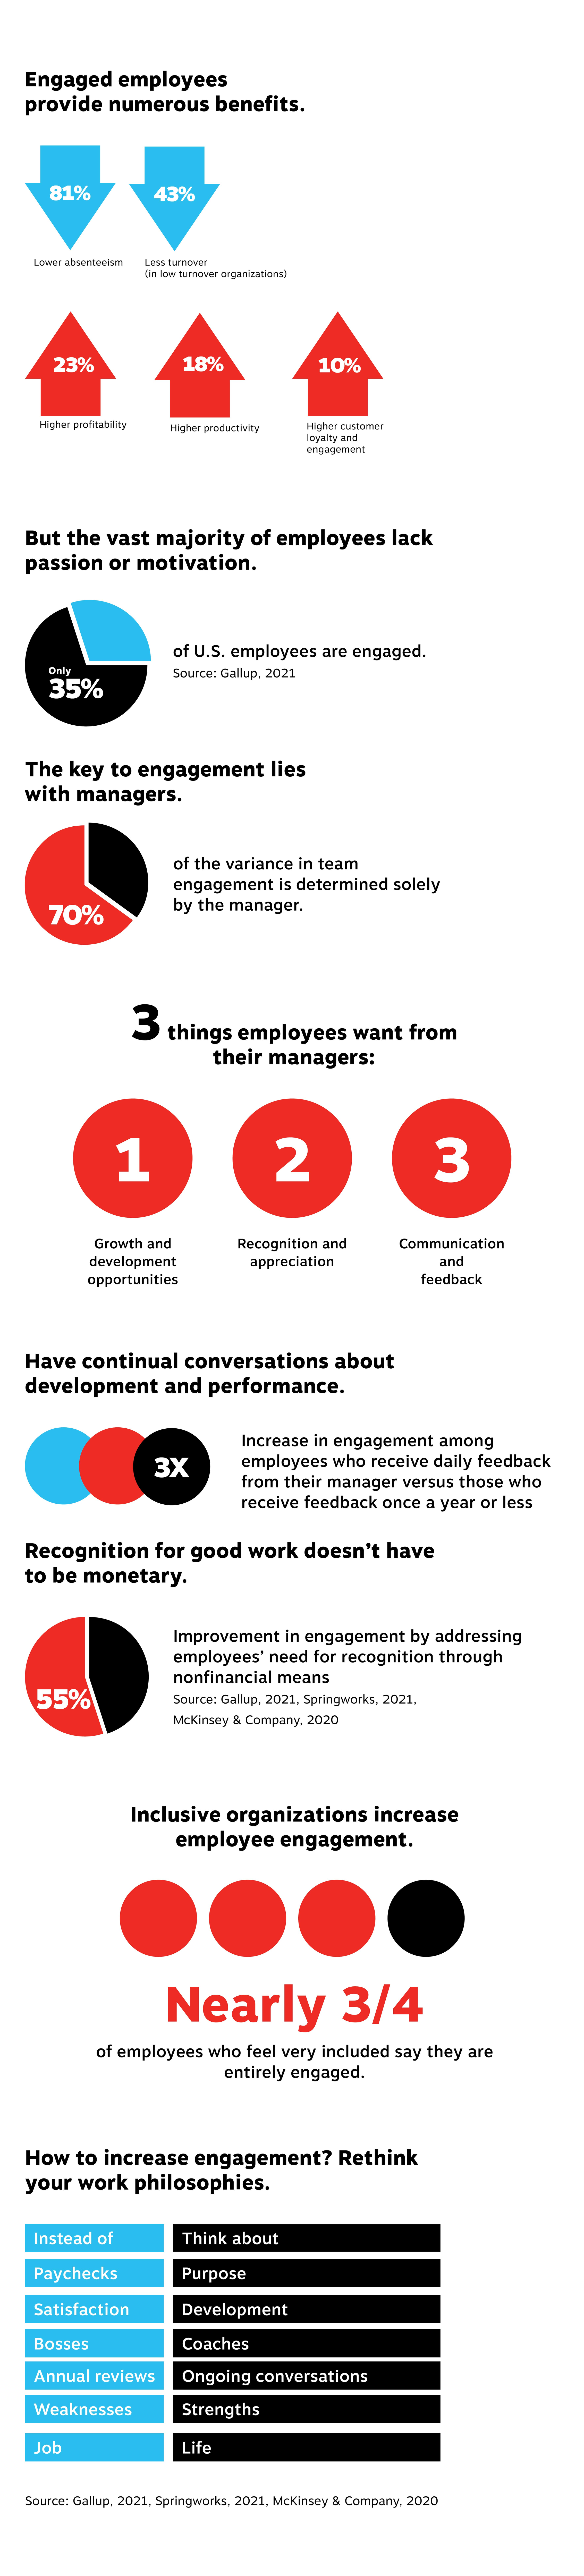 infographic about engaged employees 